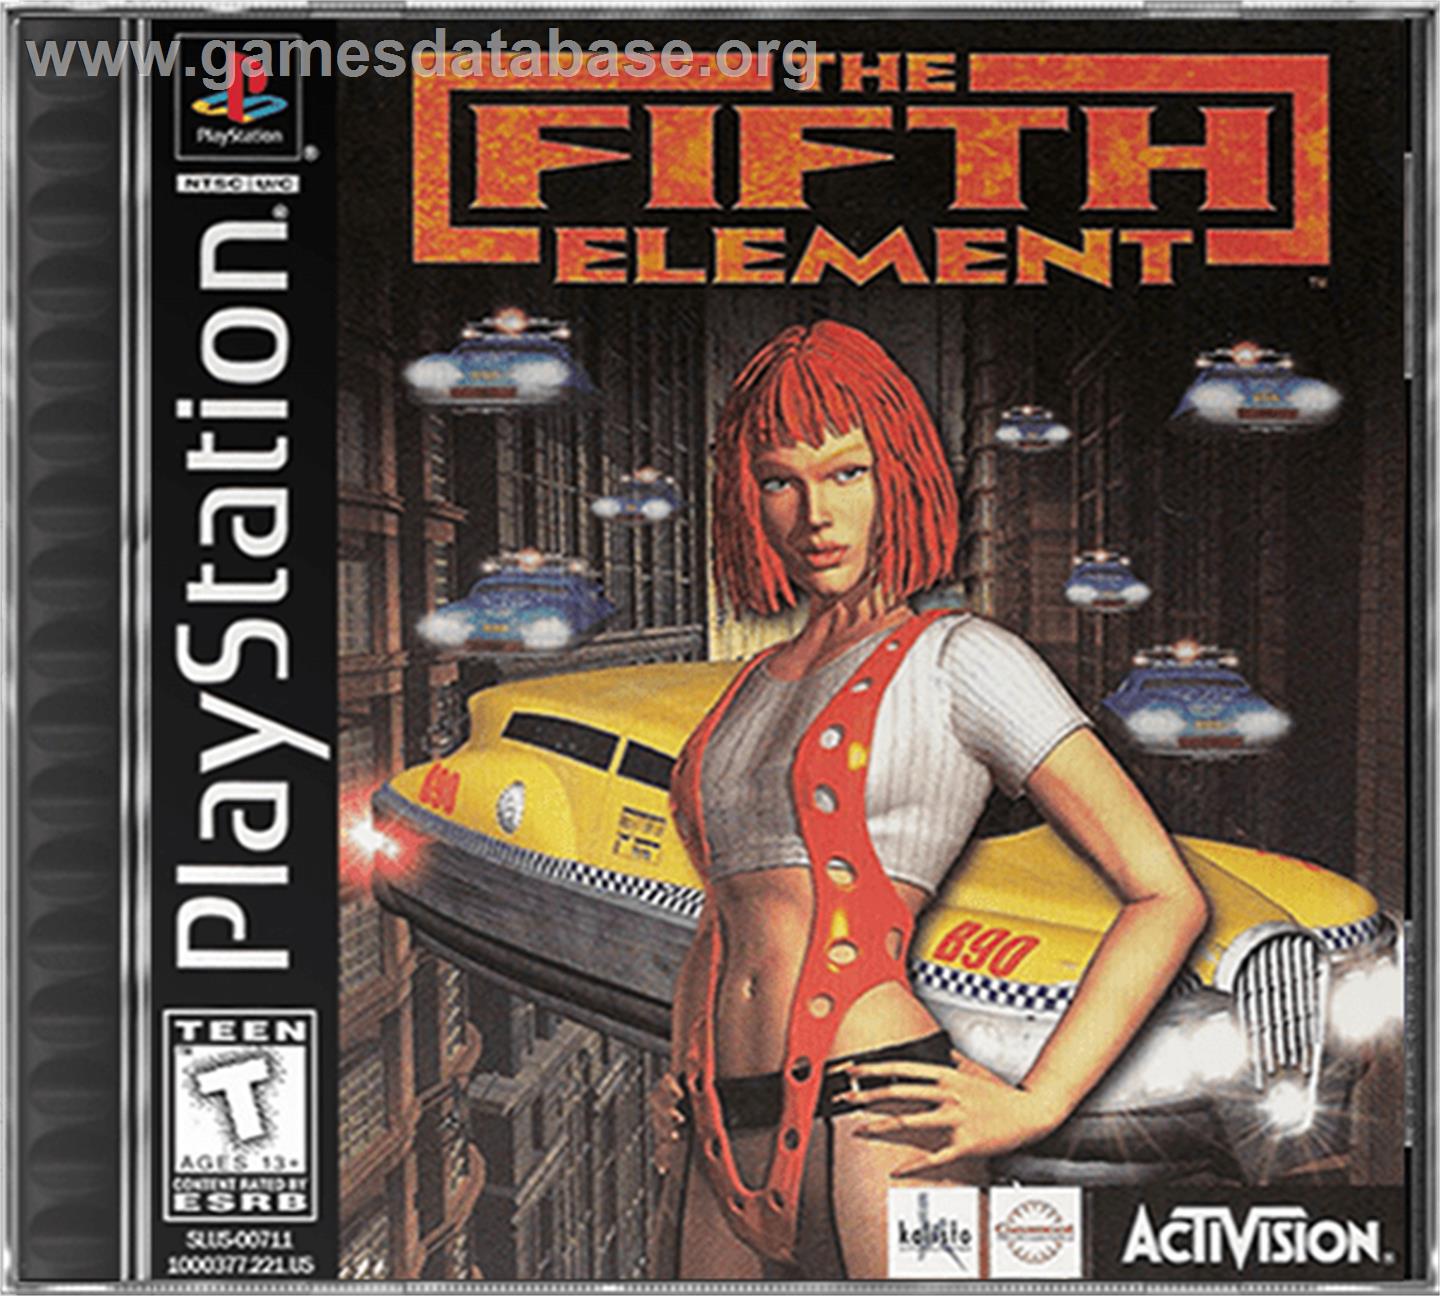 The Fifth Element - Sony Playstation - Artwork - Box